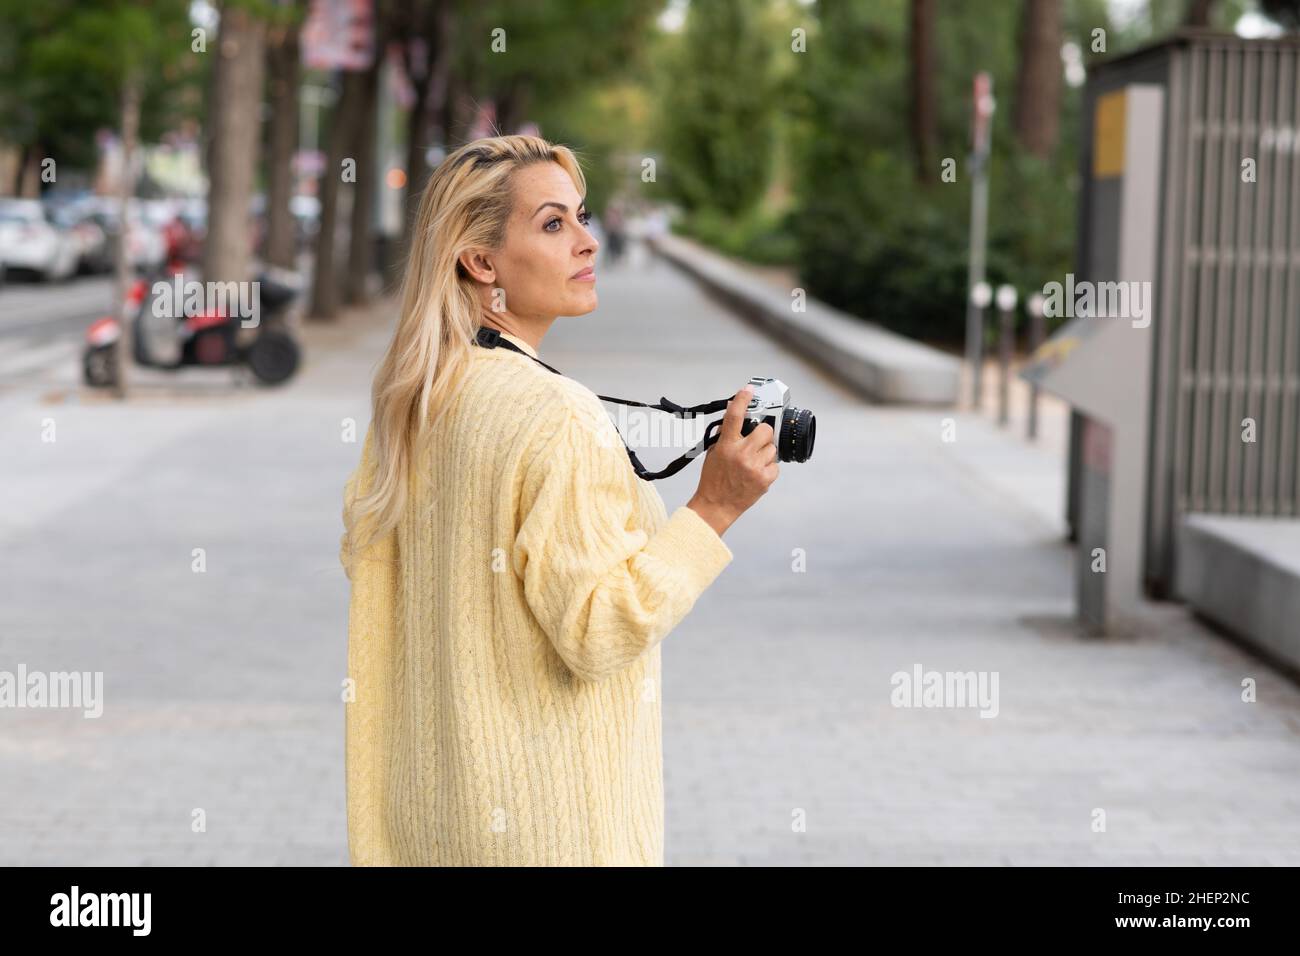 Woman with a camera walking distracted on the street Stock Photo